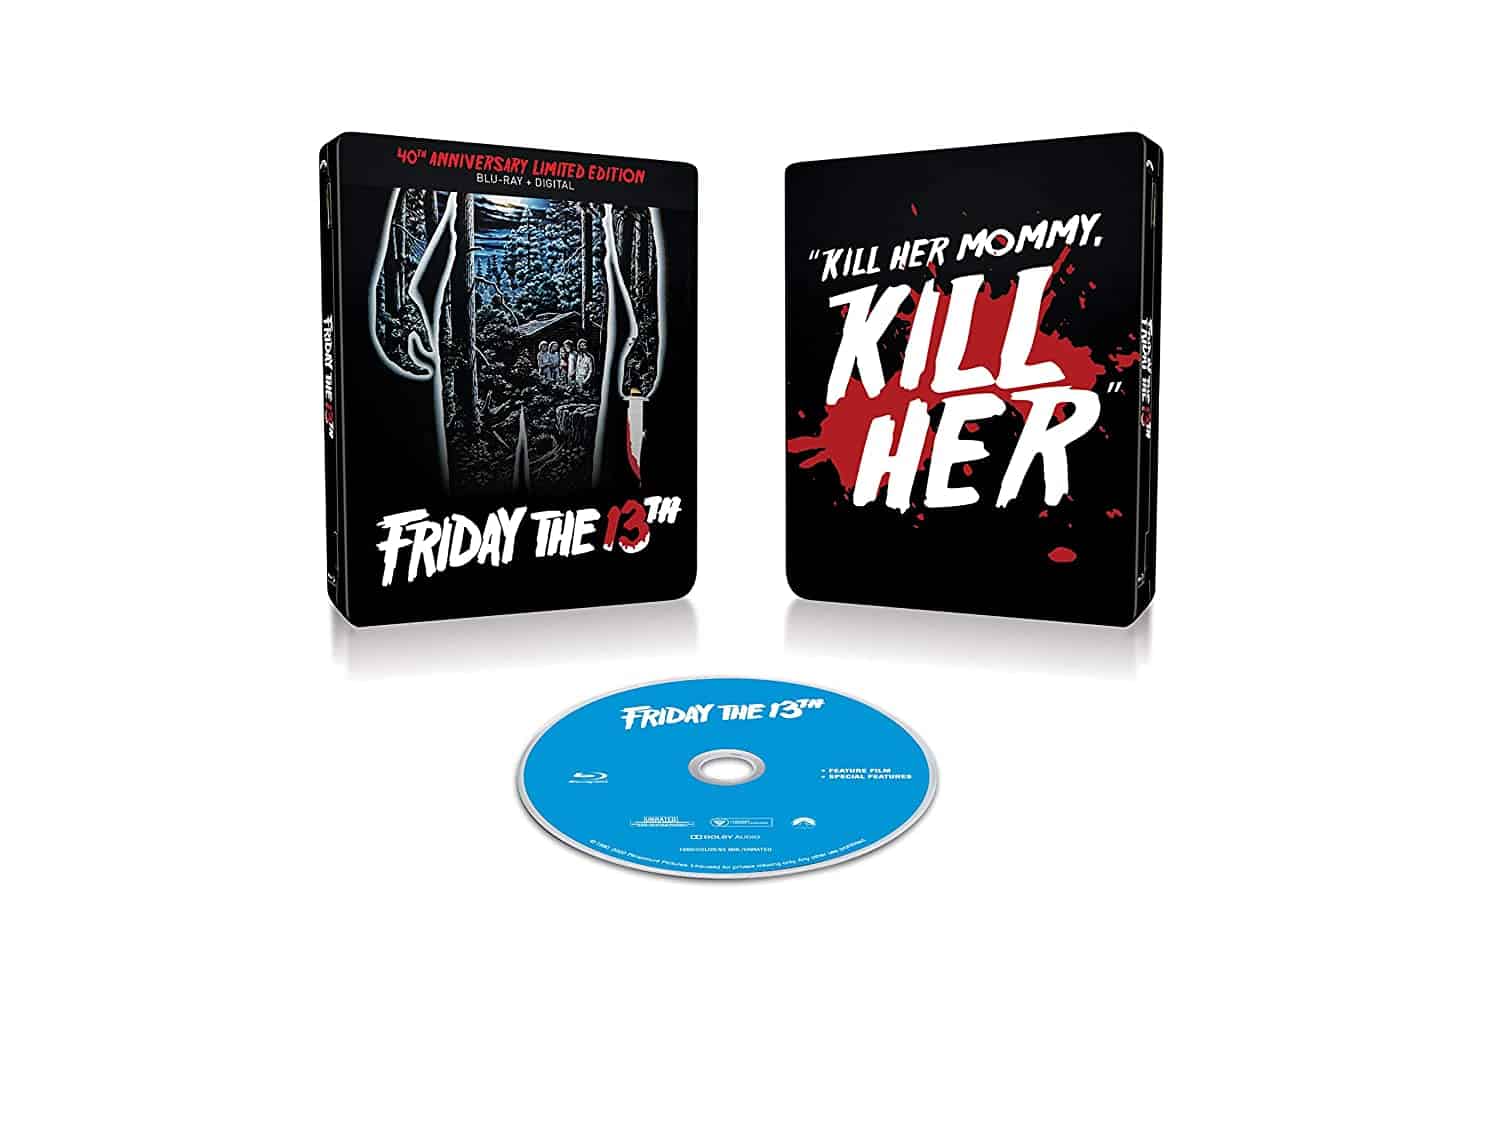 Friday the 13th Part 3 gets a steelbook, while Friday the 13th goes 4K UHD! 2